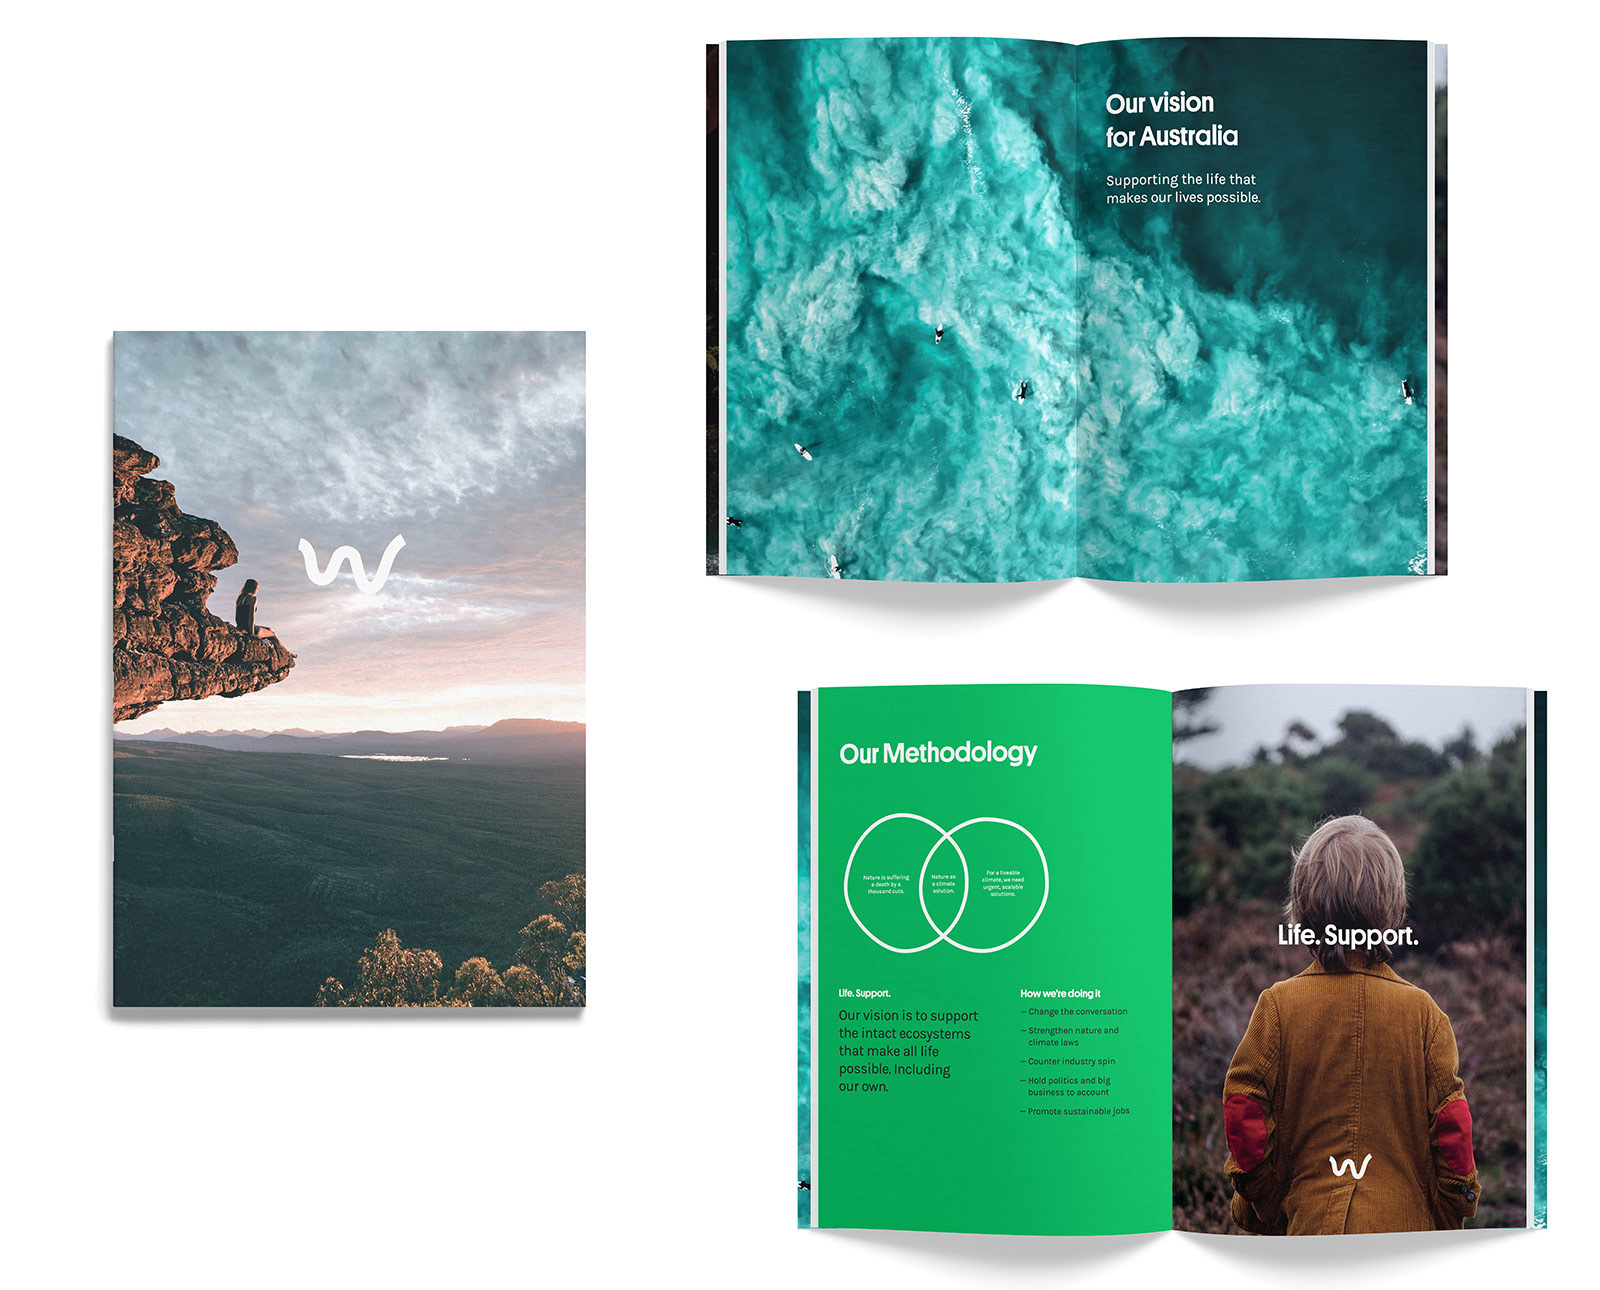 New Logo and Identity for Wilderness Society by Alter